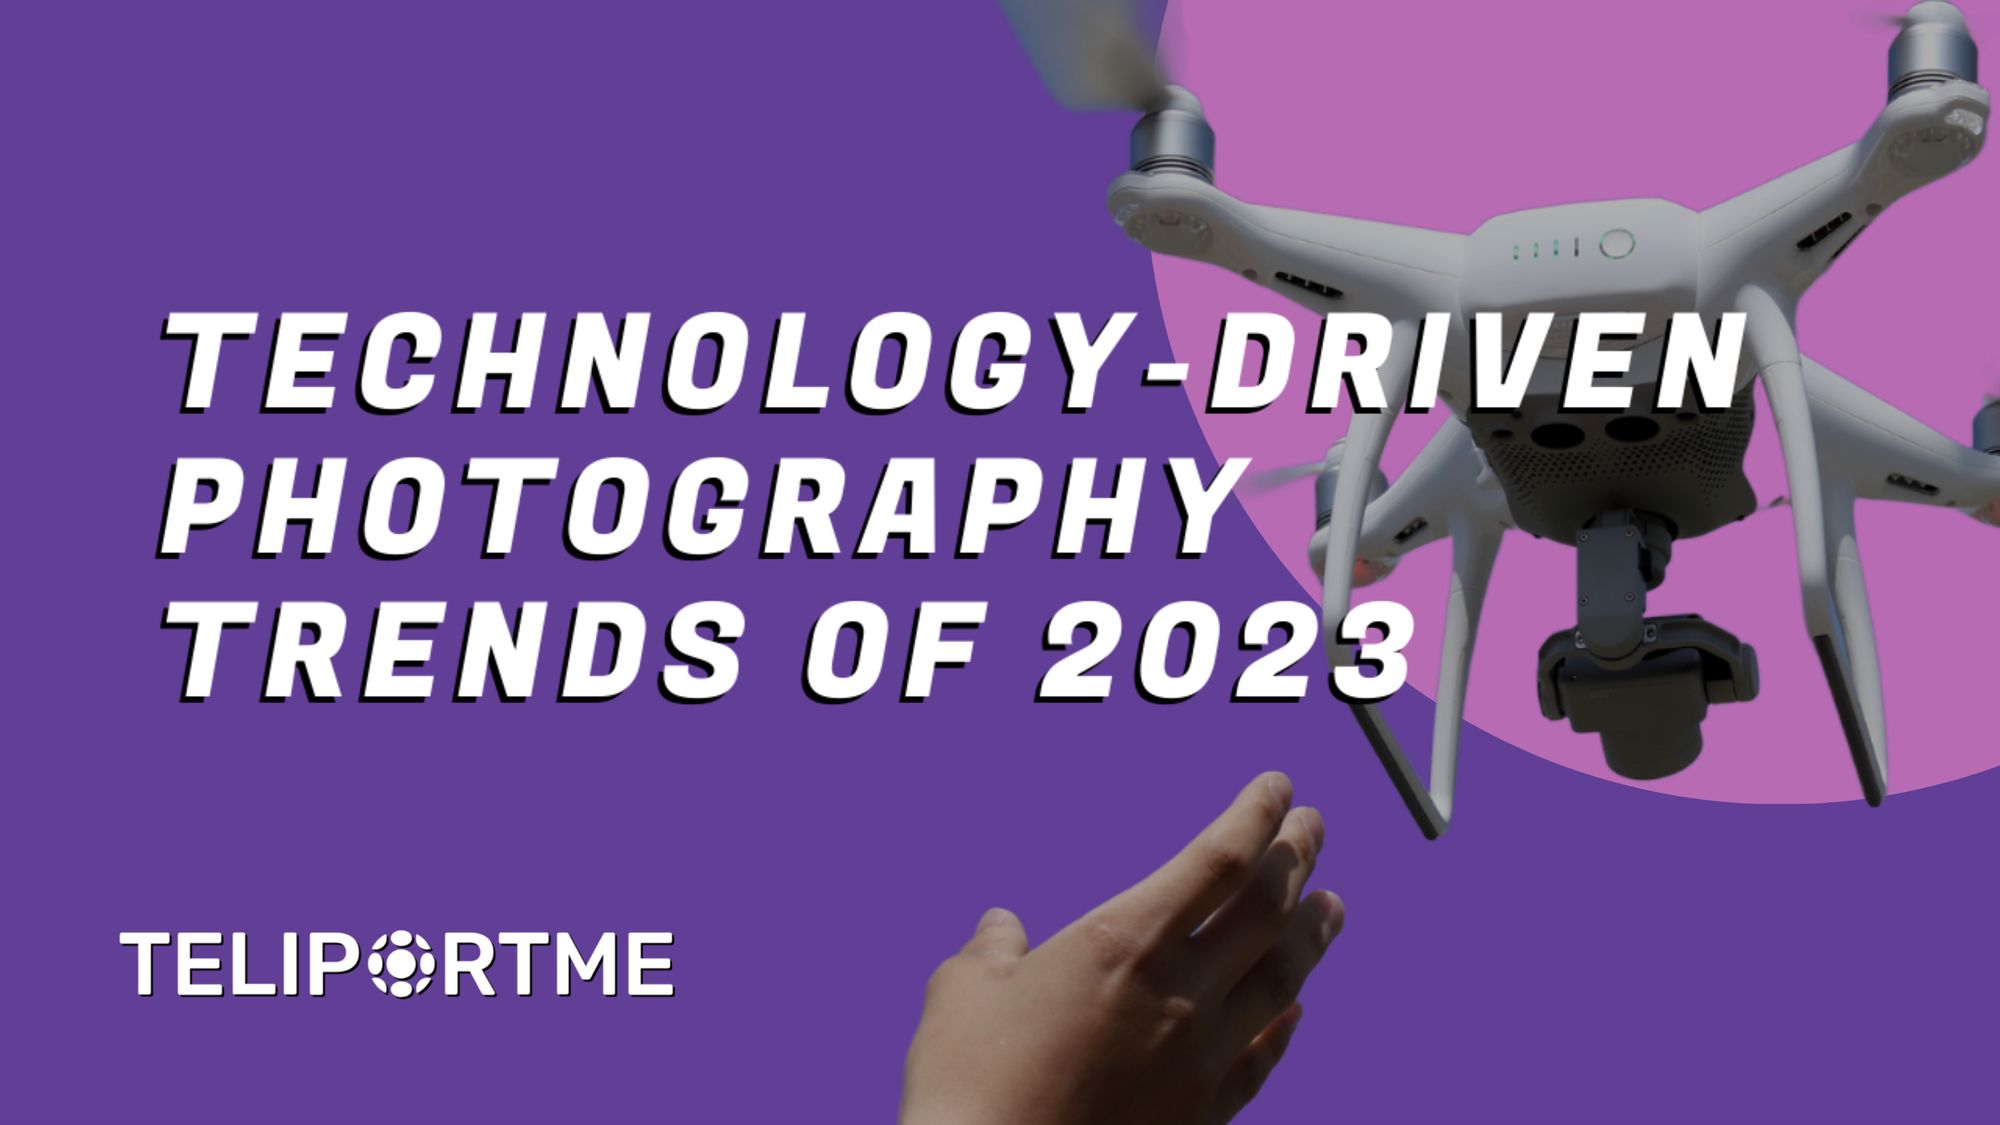 Top 11 Technology-Driven Photography Trends of 2023